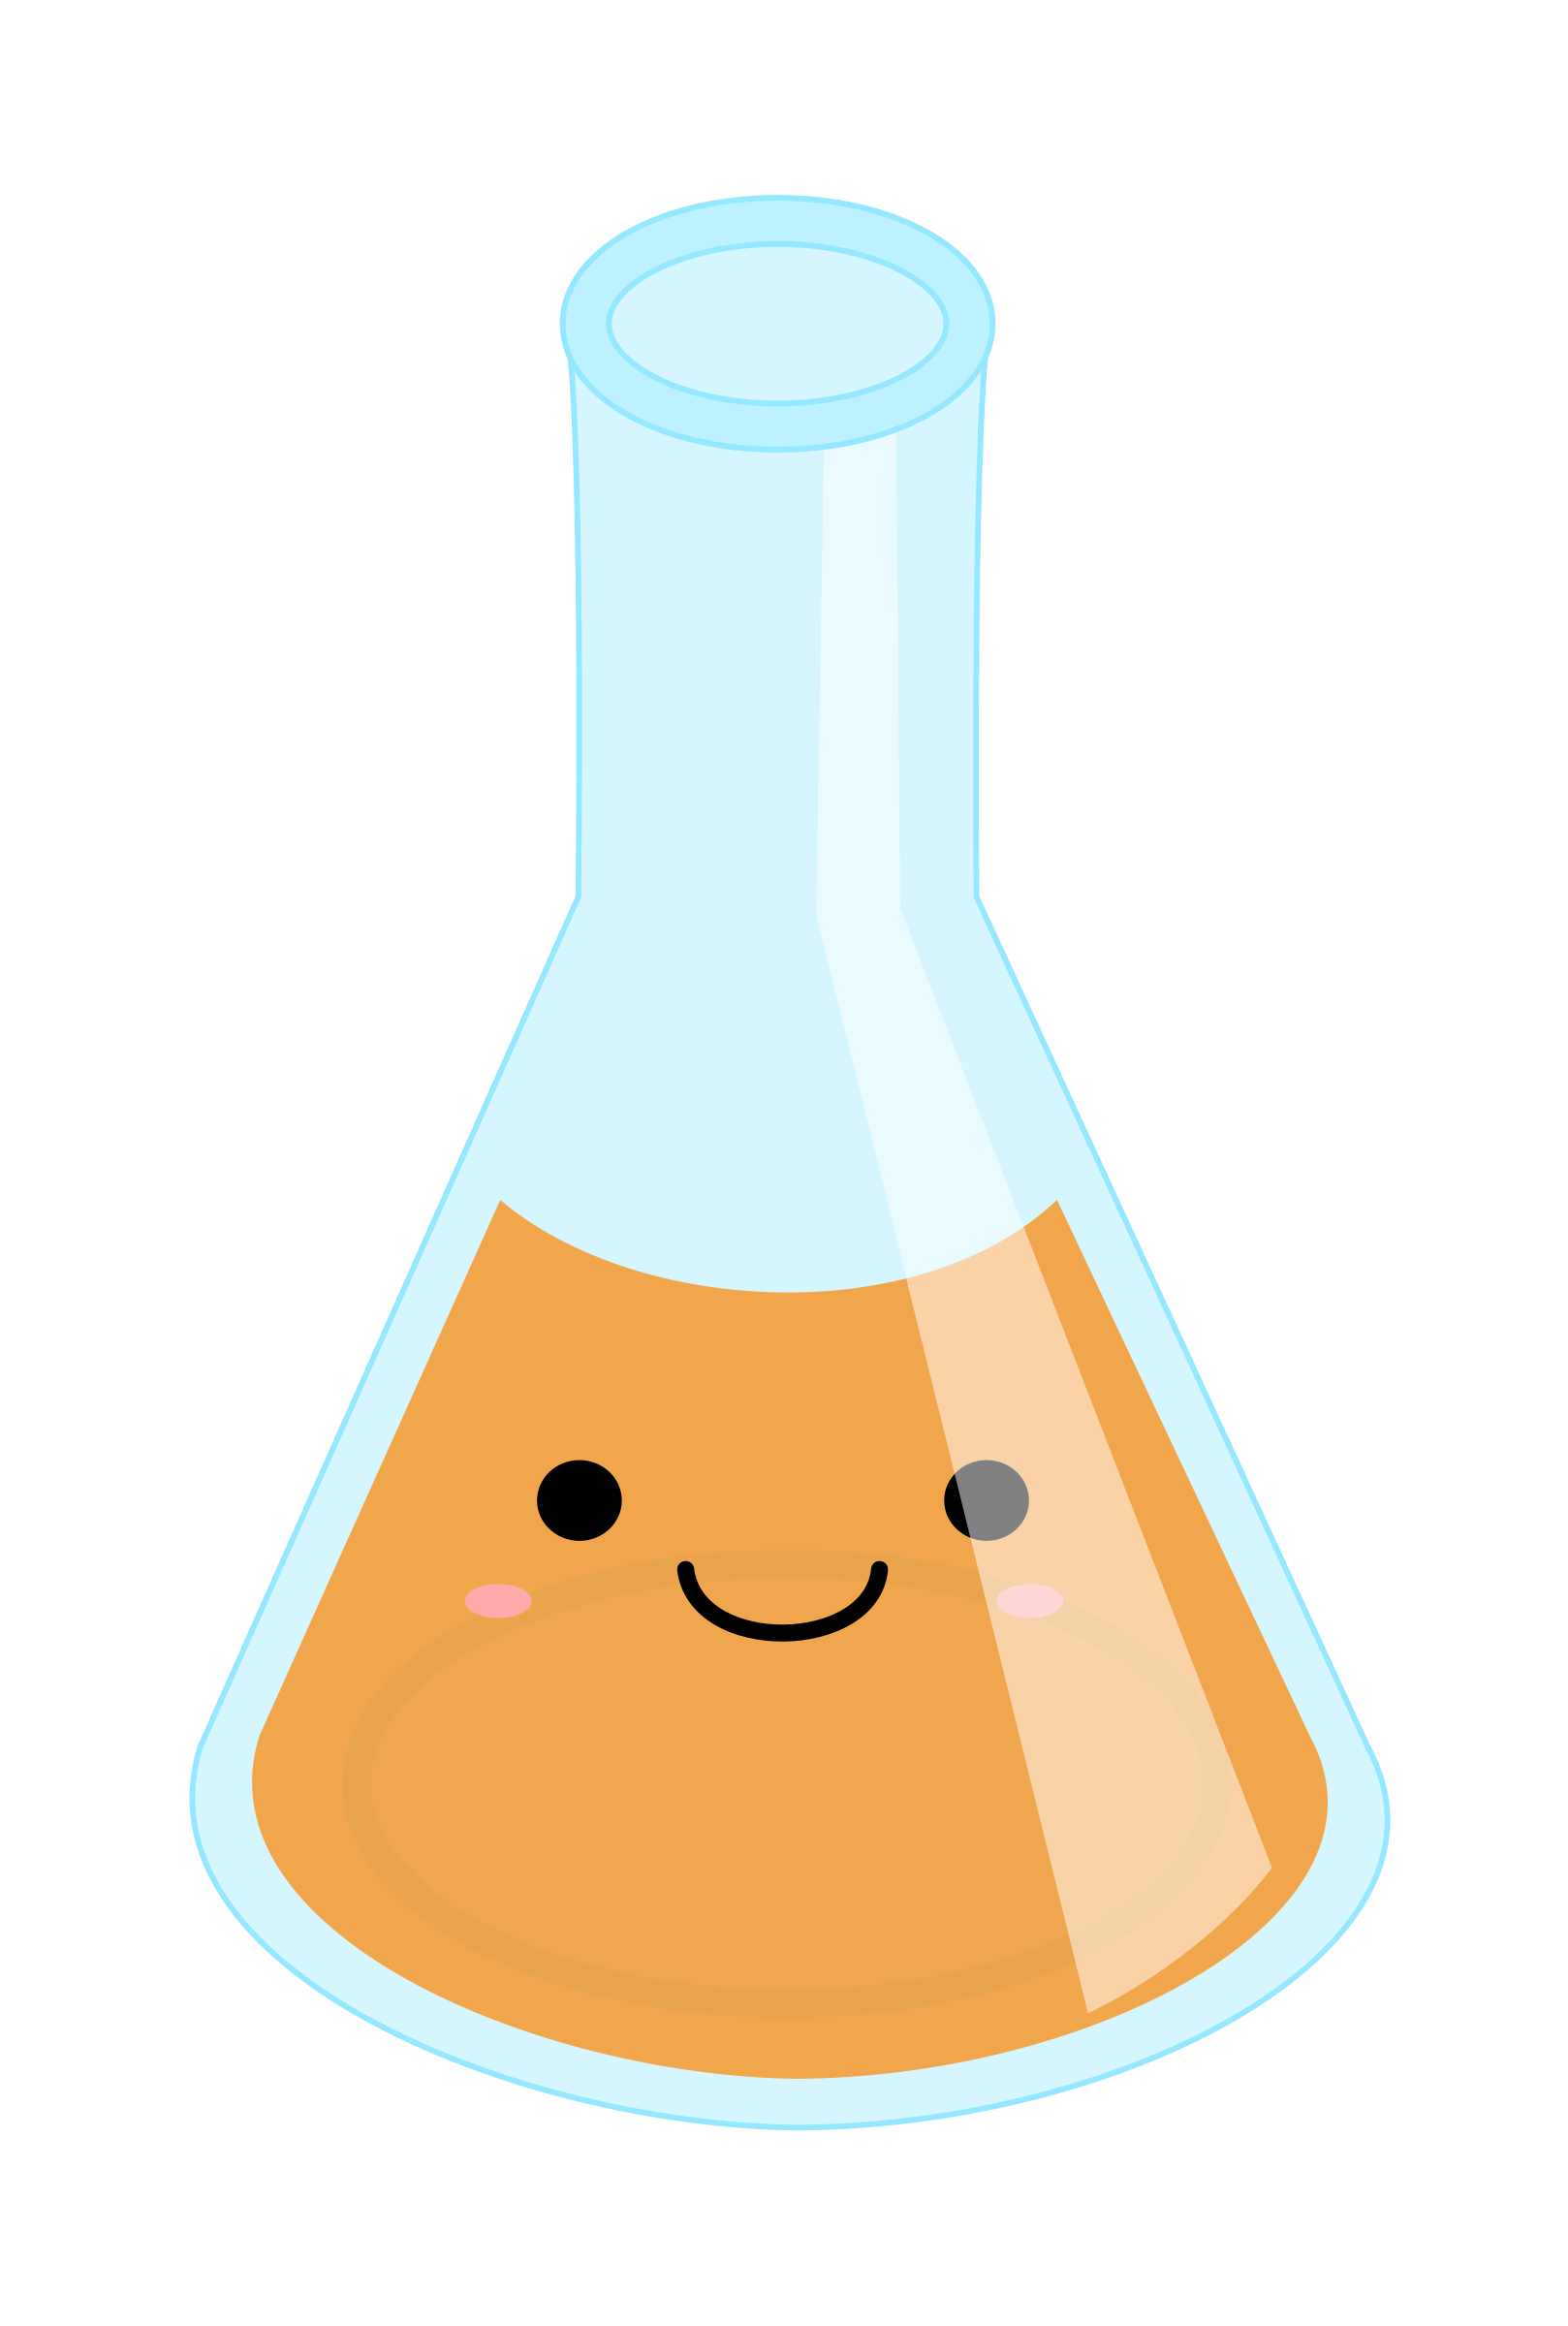 Full erlenmeyer flask by. Scale clipart kawaii